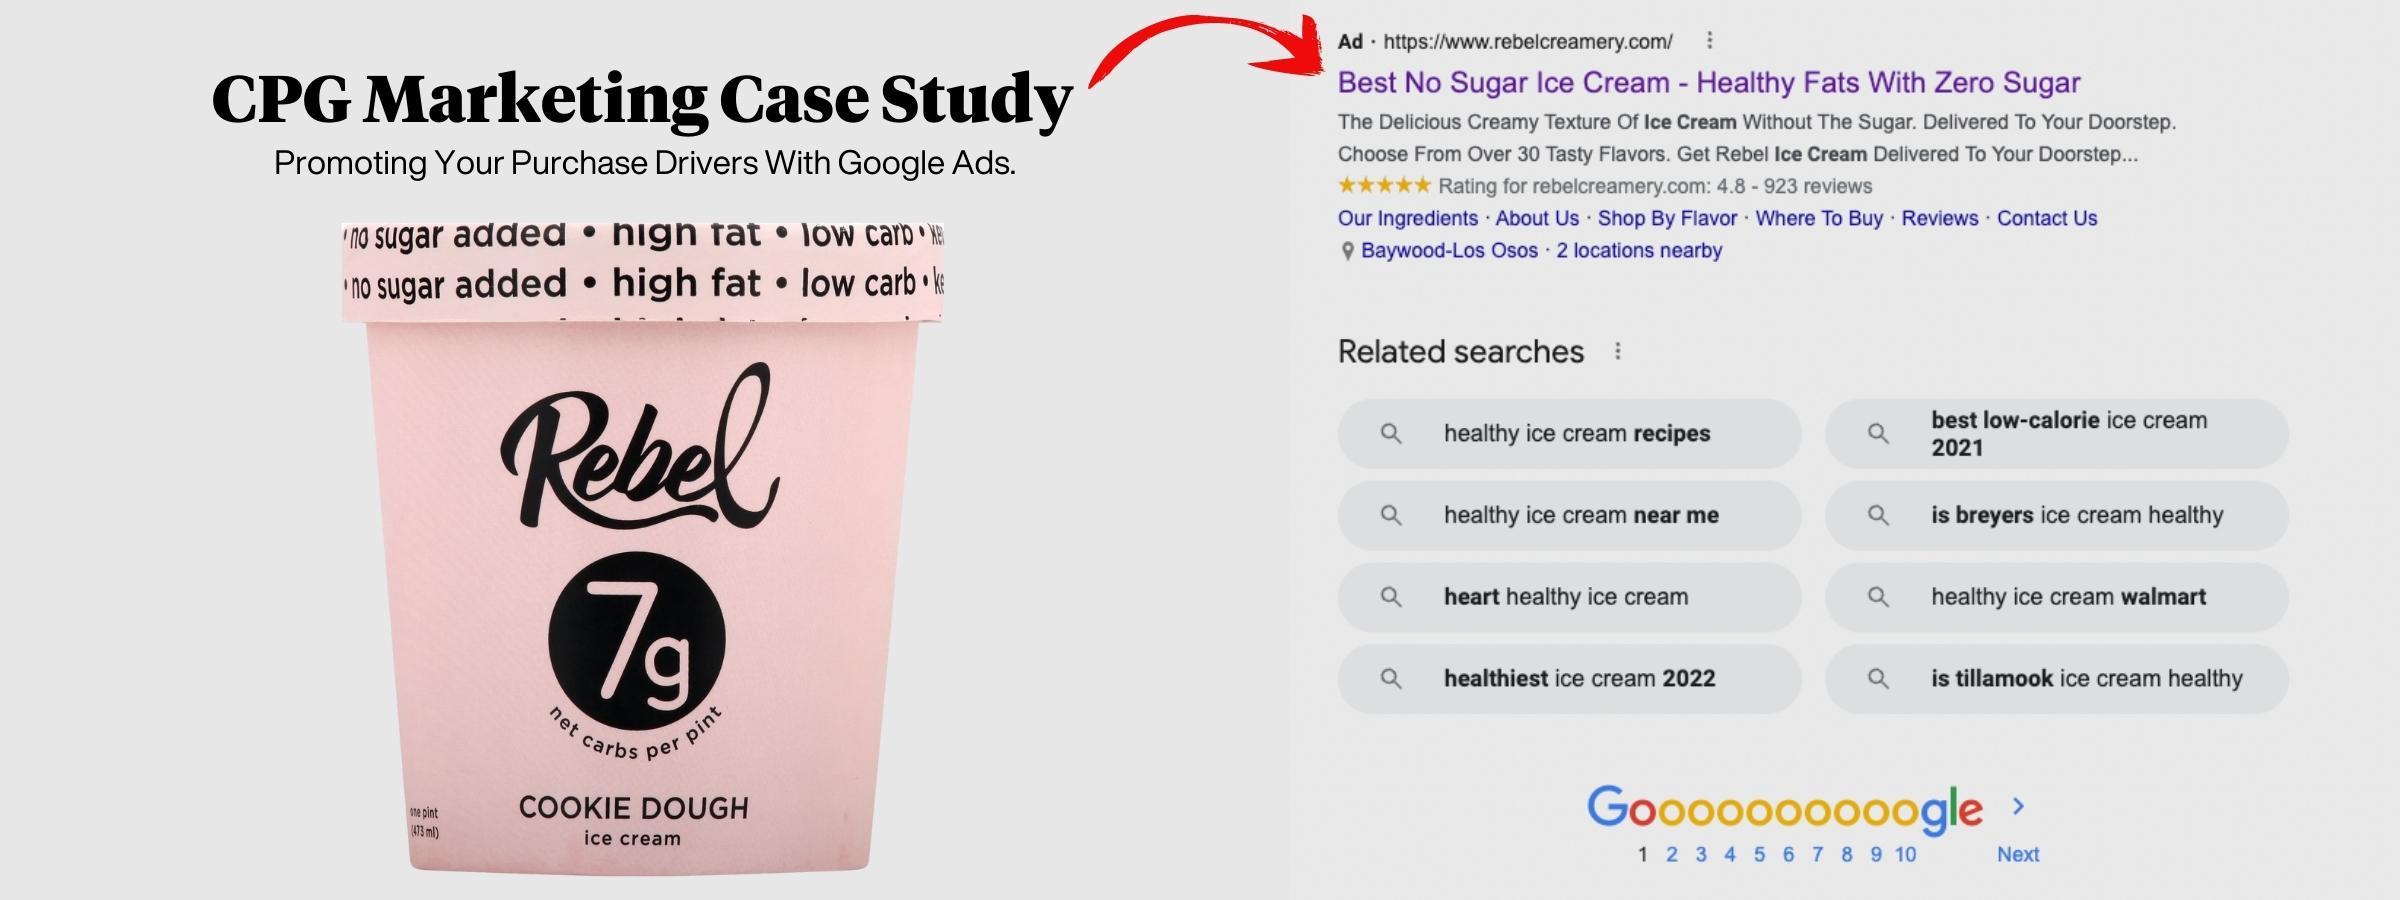 CPG Marketing With Google Ads